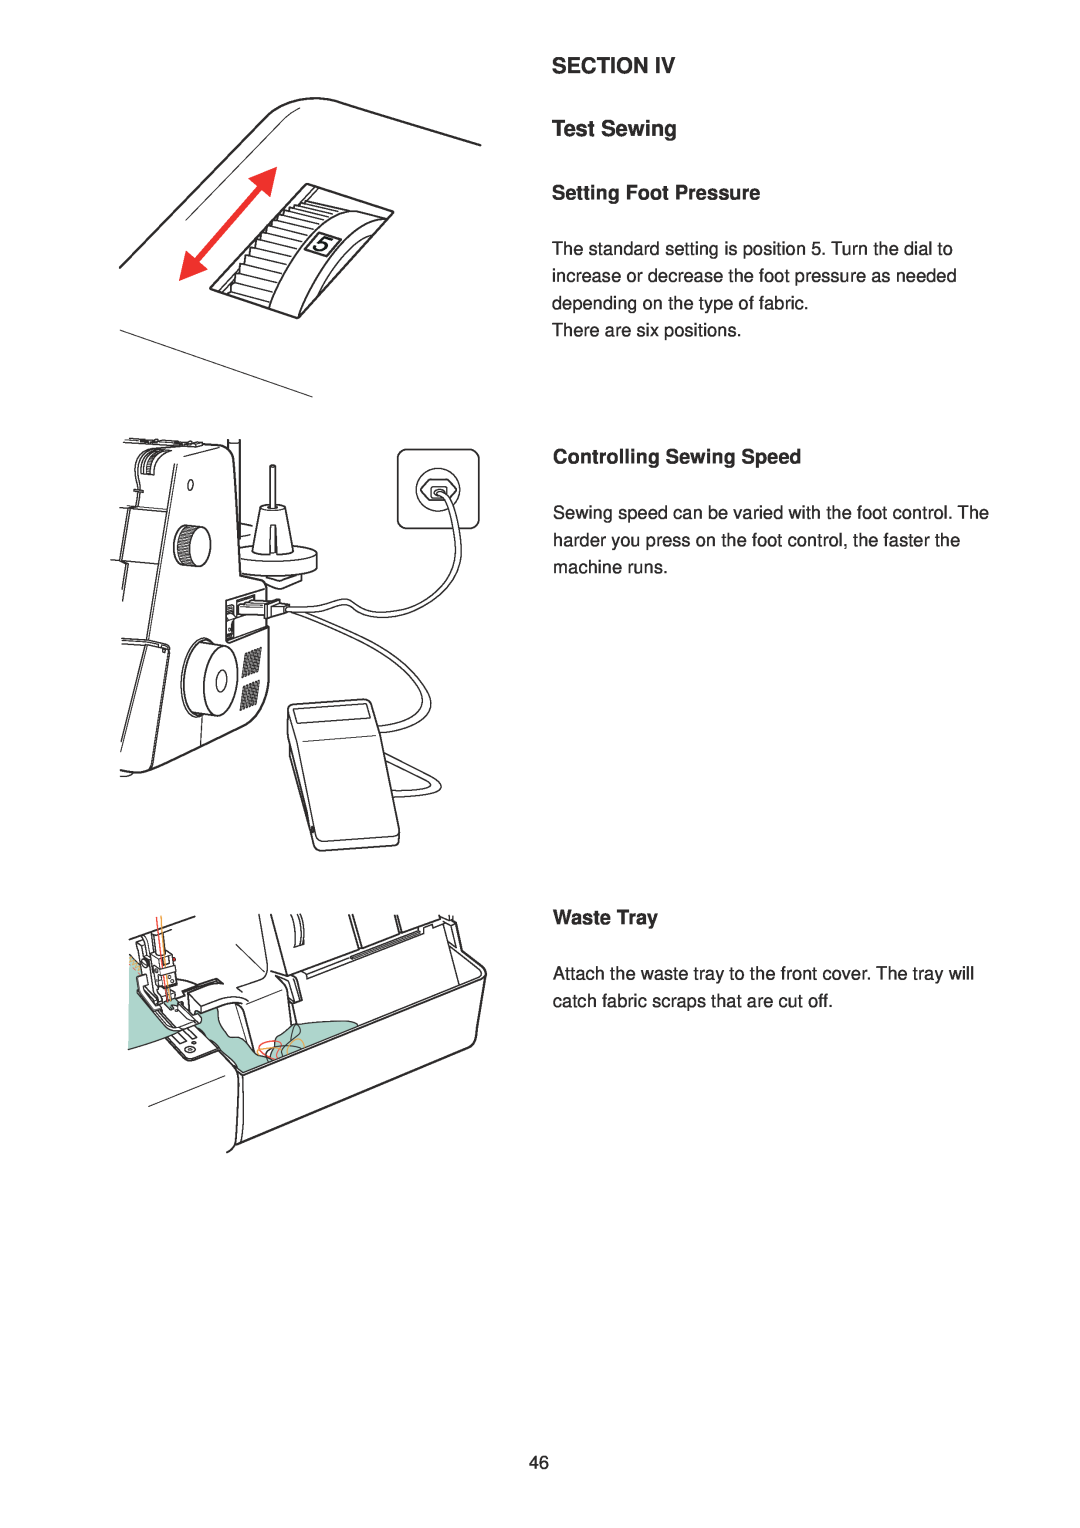 Janome 1100D Professional manual SECTION Test Sewing, Setting Foot Pressure, Controlling Sewing Speed, Waste Tray 